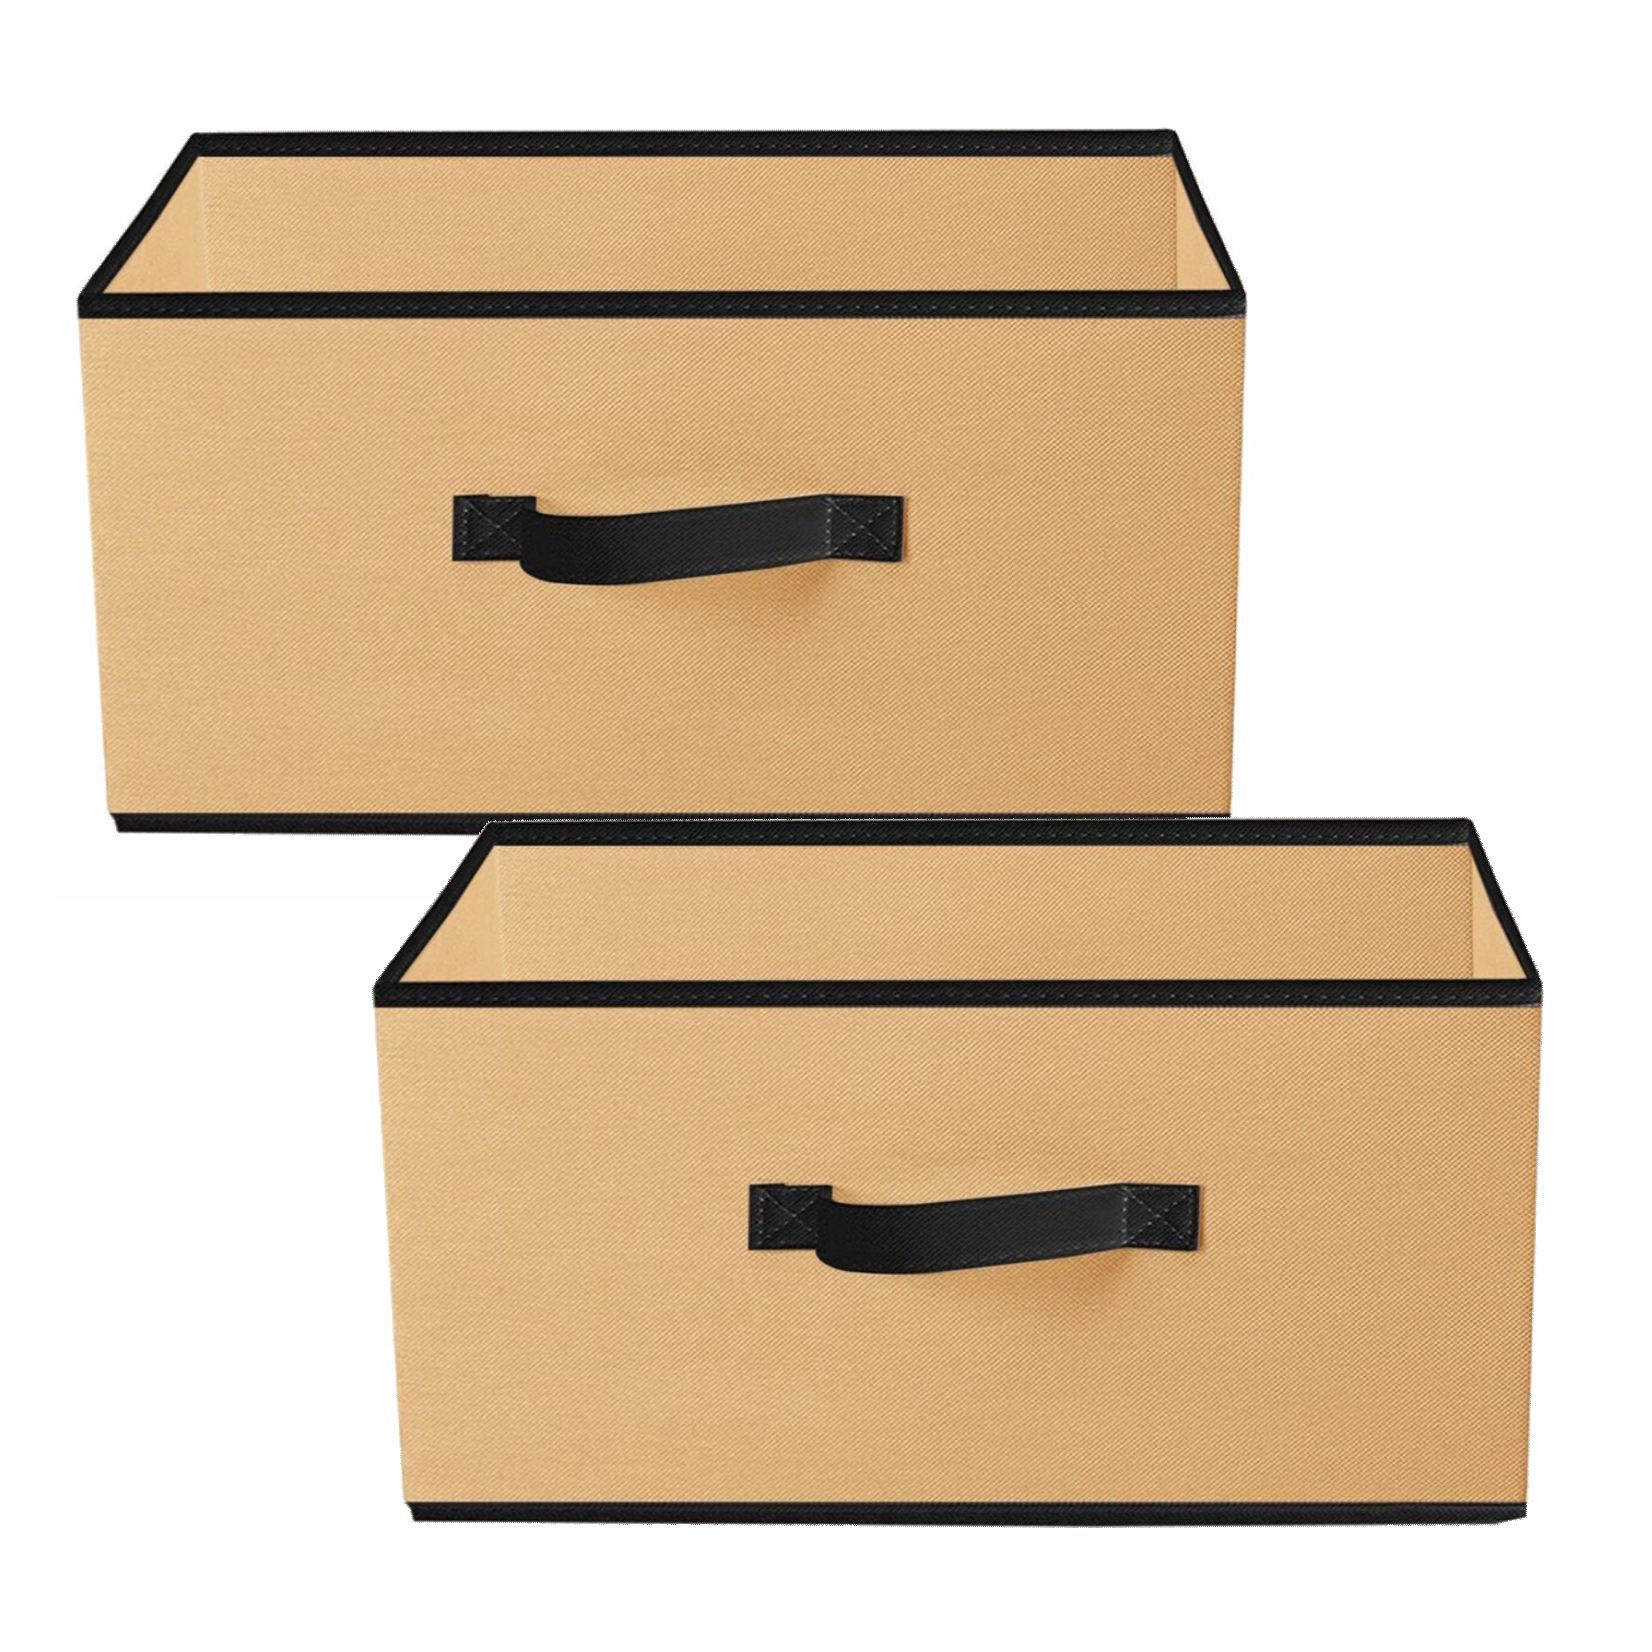     			HOMETALES - Storage Boxes & Baskets ( Pack of 2 )